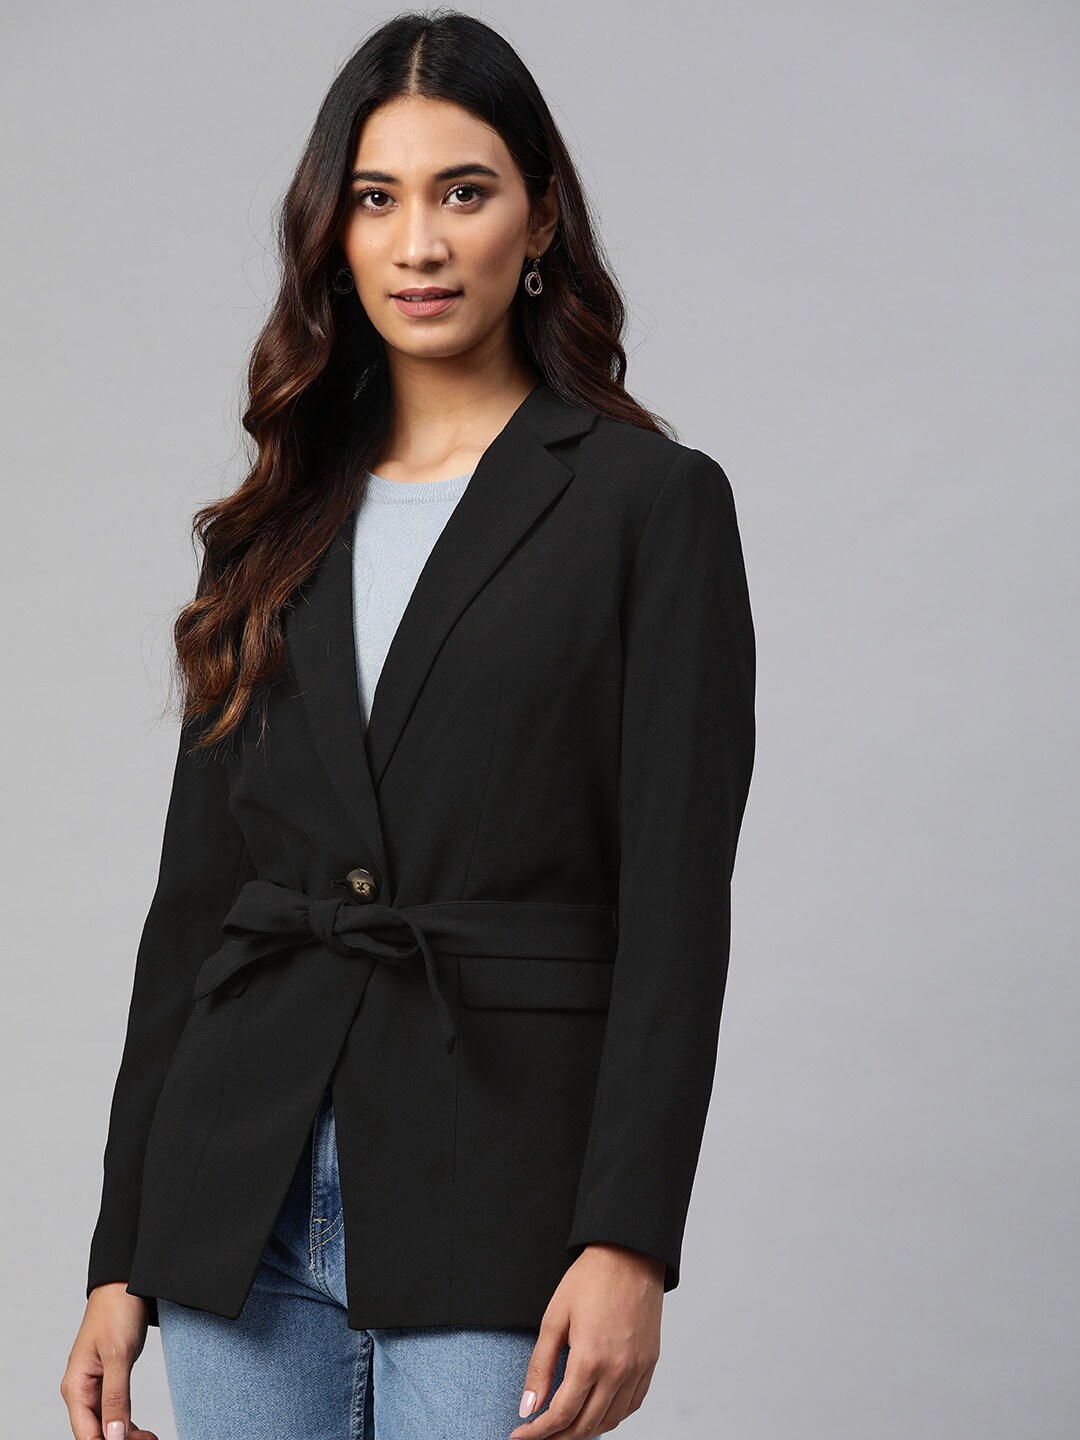 Marks & Spencer Women Black Solid Single Breasted Blazer with Belt Price in India